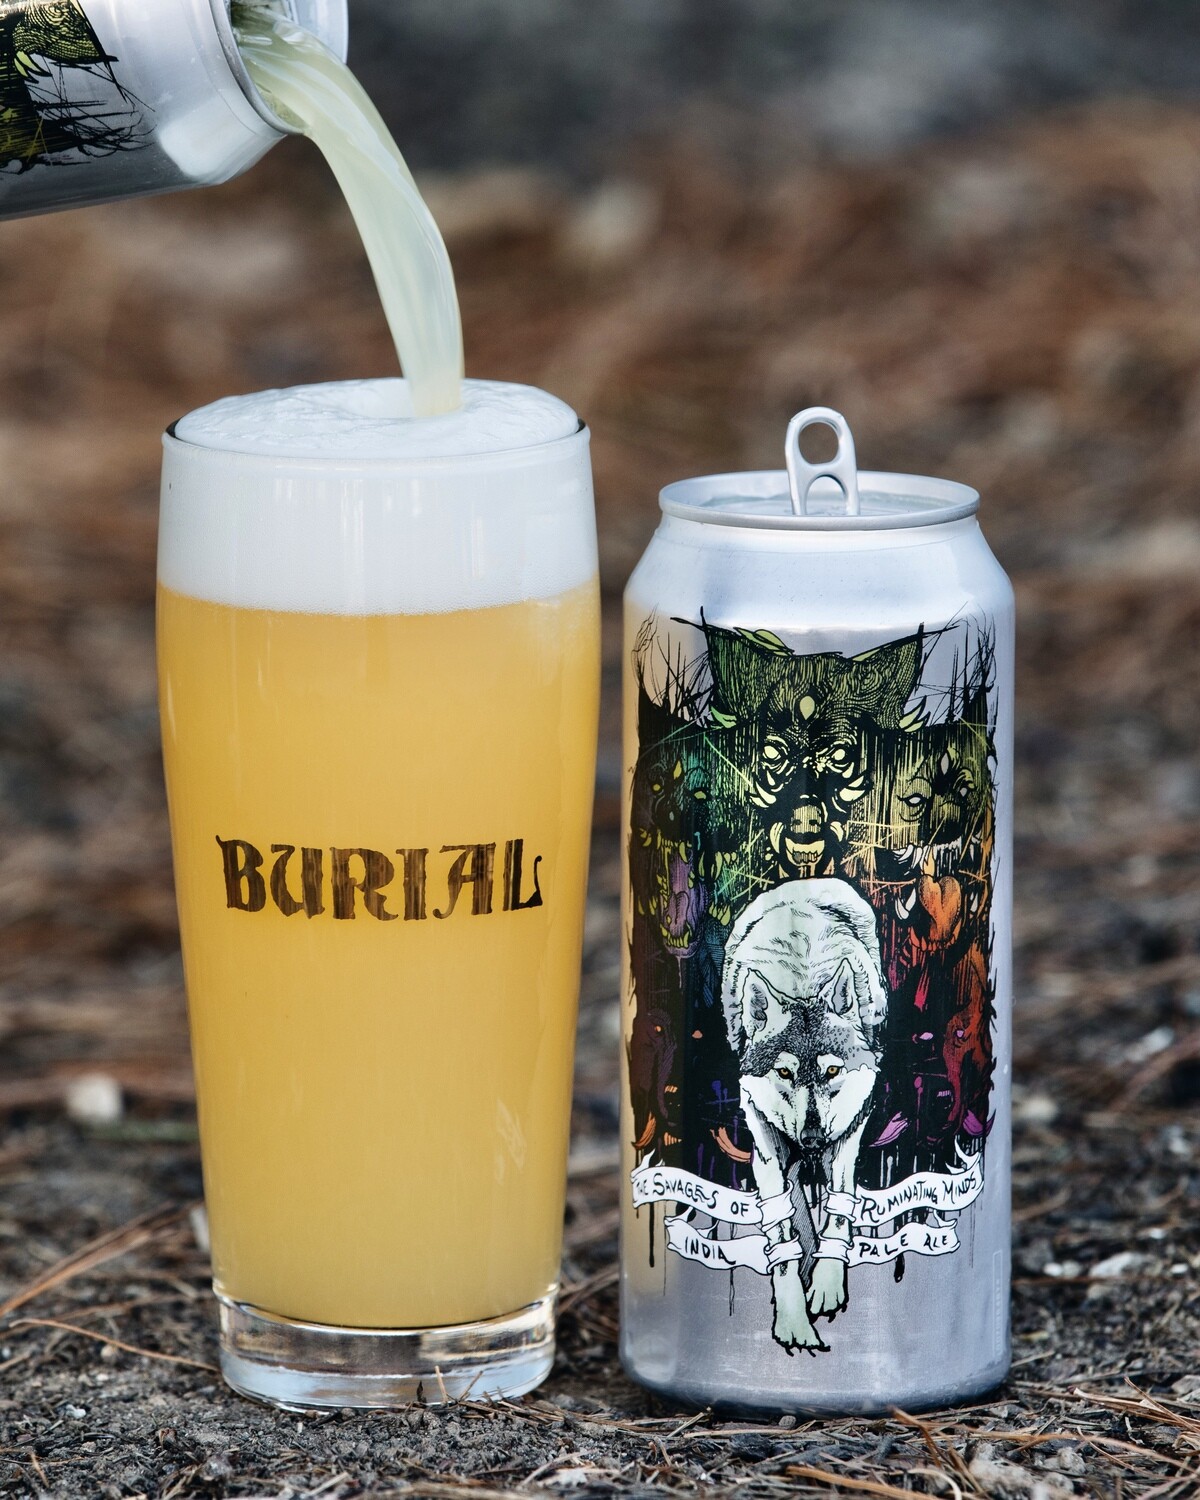 Burial Savages of Ruminating Minds IPA